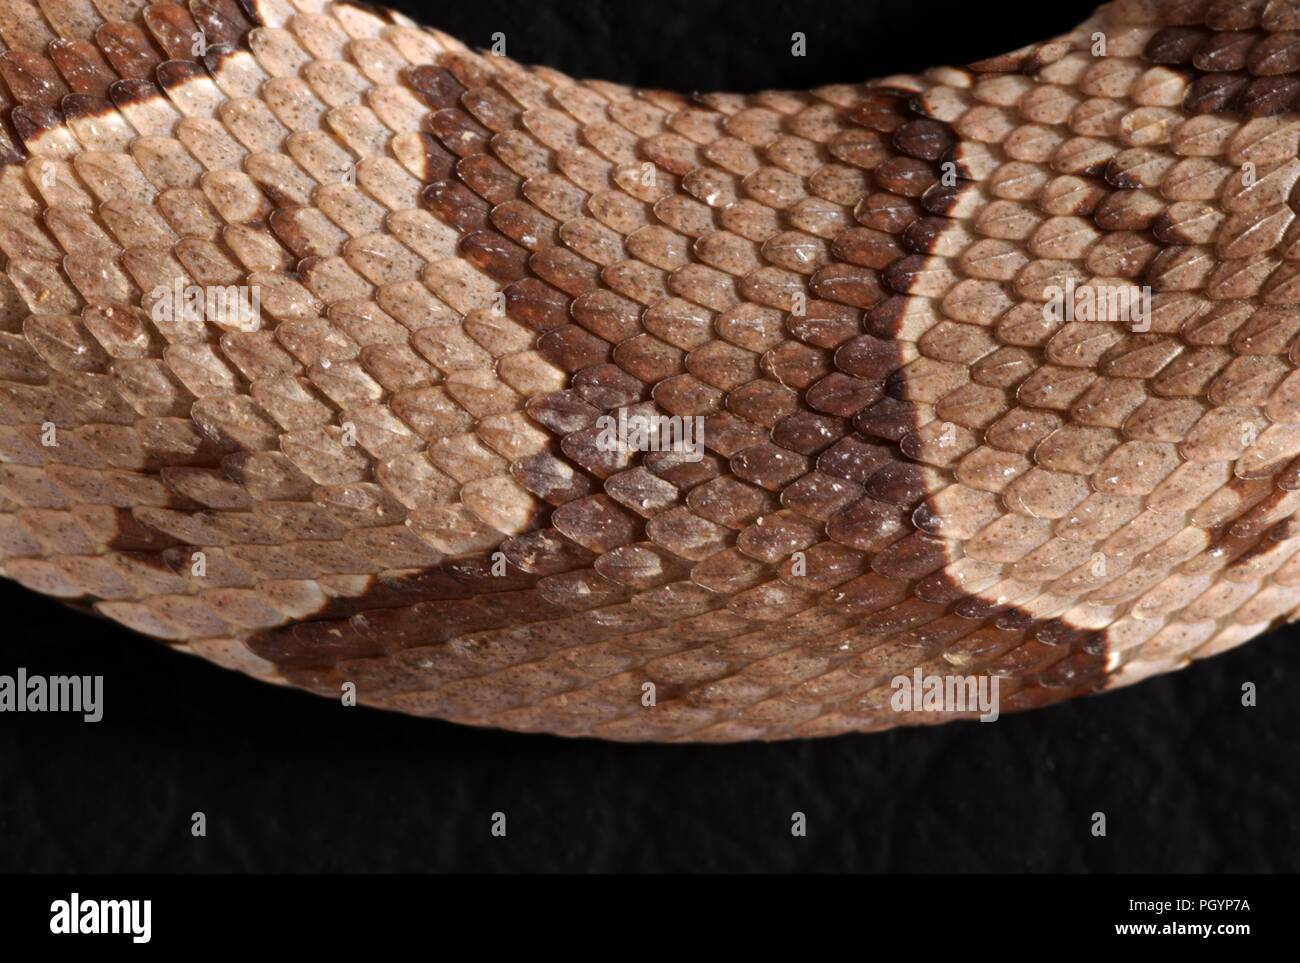 Photograph showing a close-up view of the brown and tan, scaled skin surface, of a juvenile, venomous, Southern copperhead snake (Agkistrodon contortrix) image courtesy CDC/James Gathany, 2008. () Stock Photo